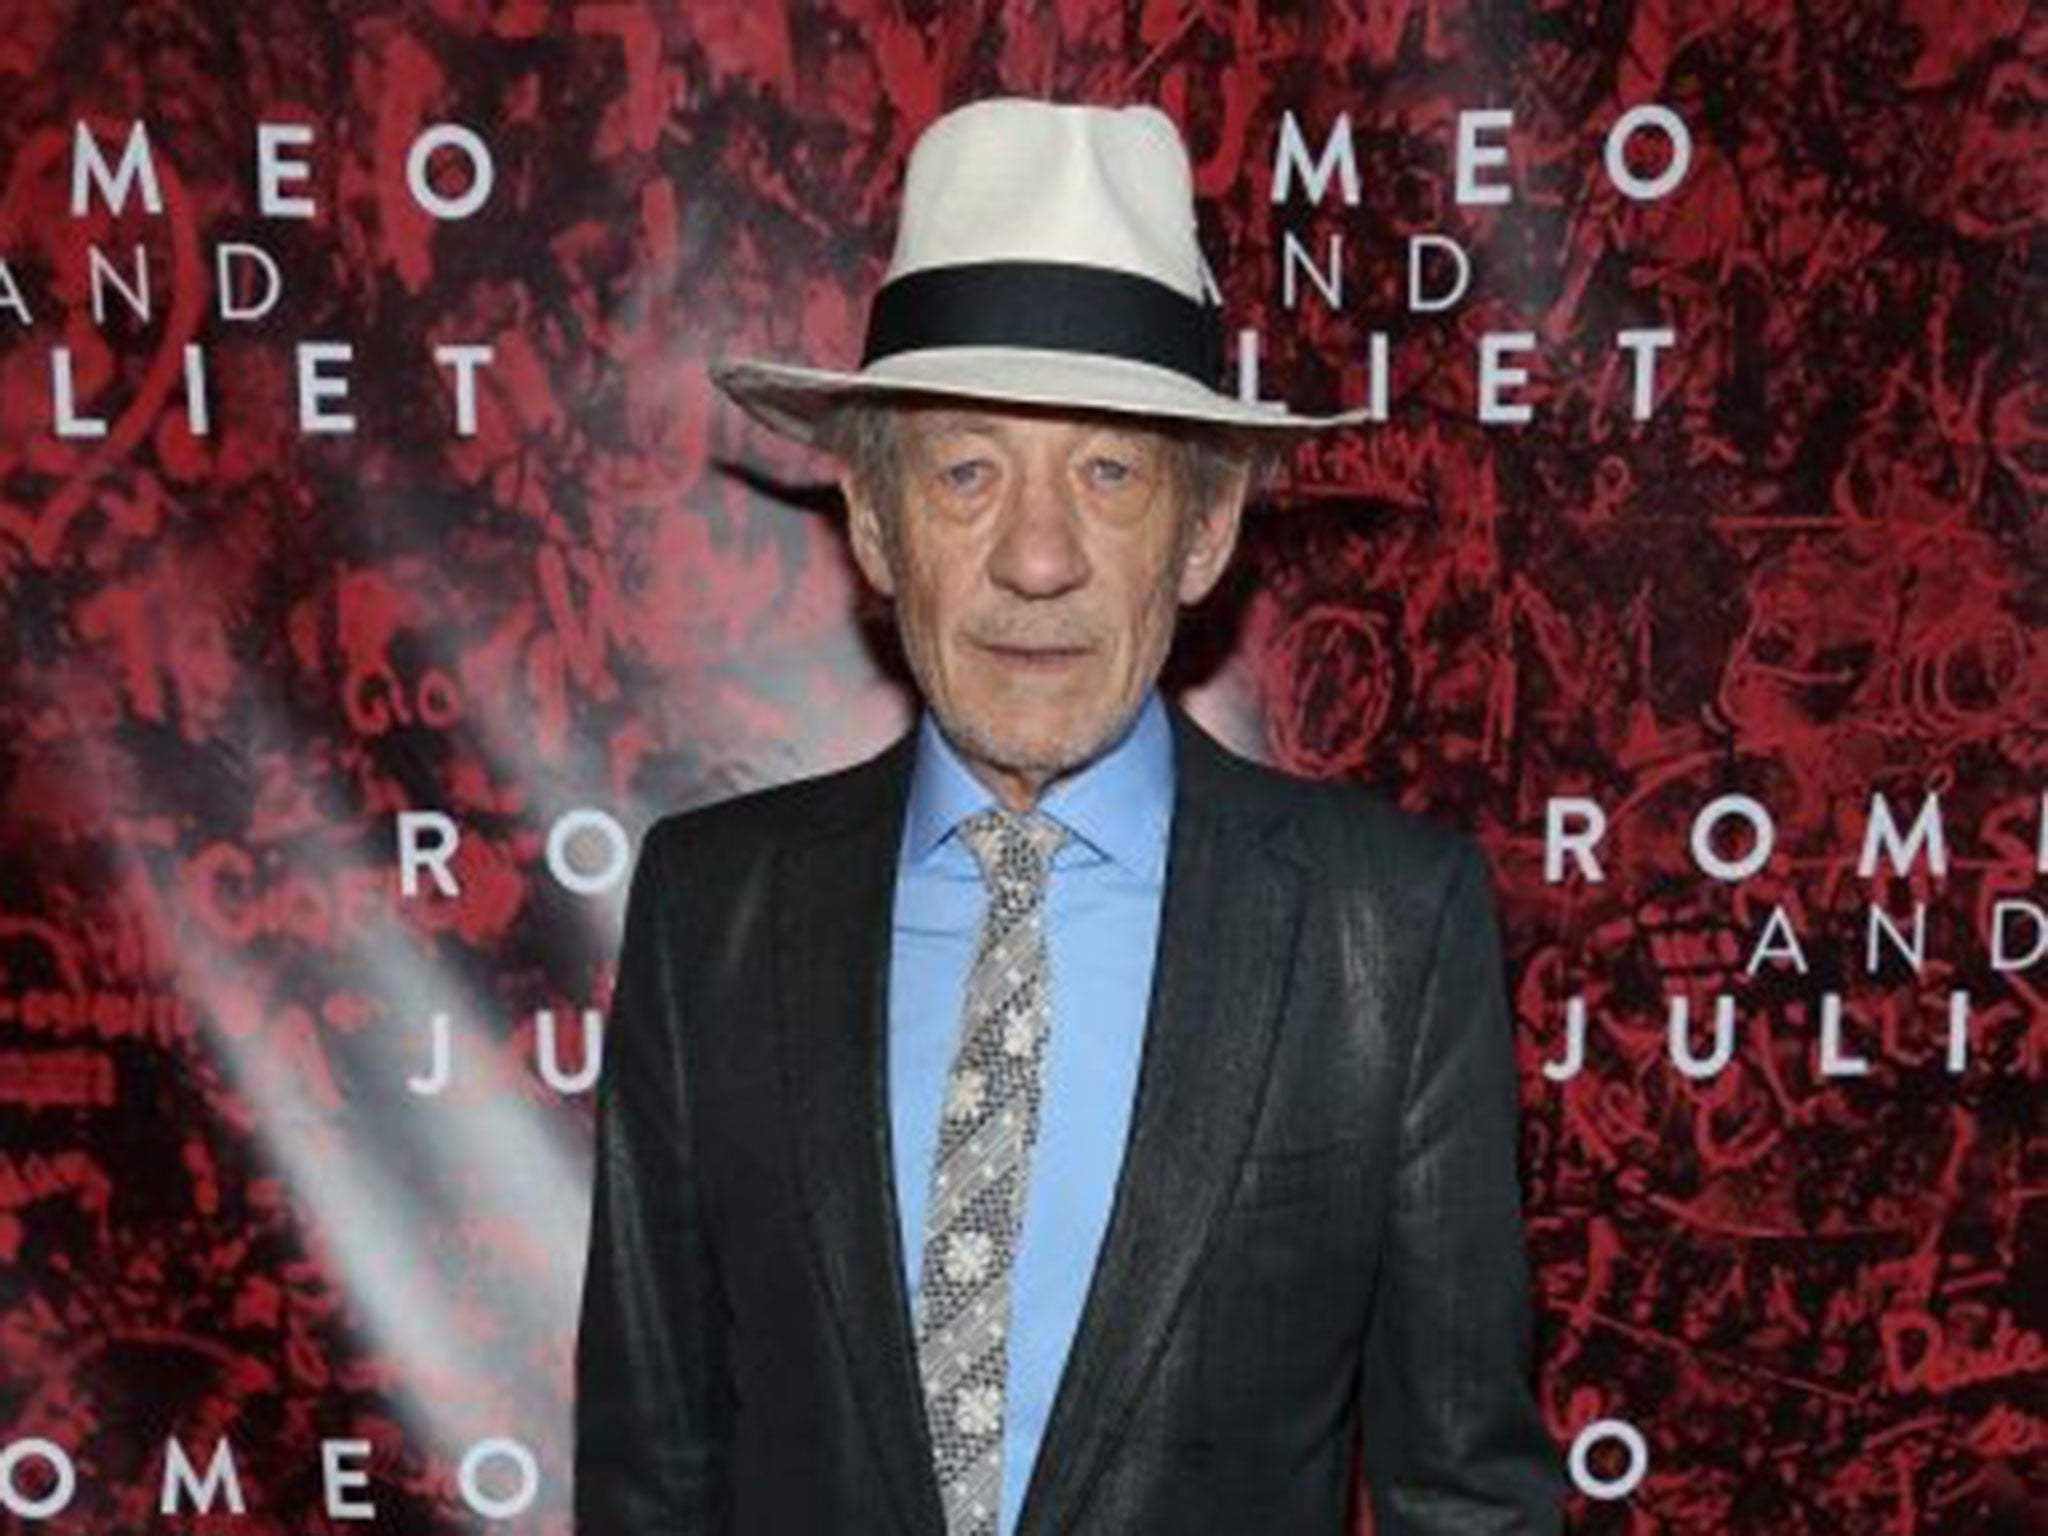 McKellen has argued most actors cannot make a living from their art